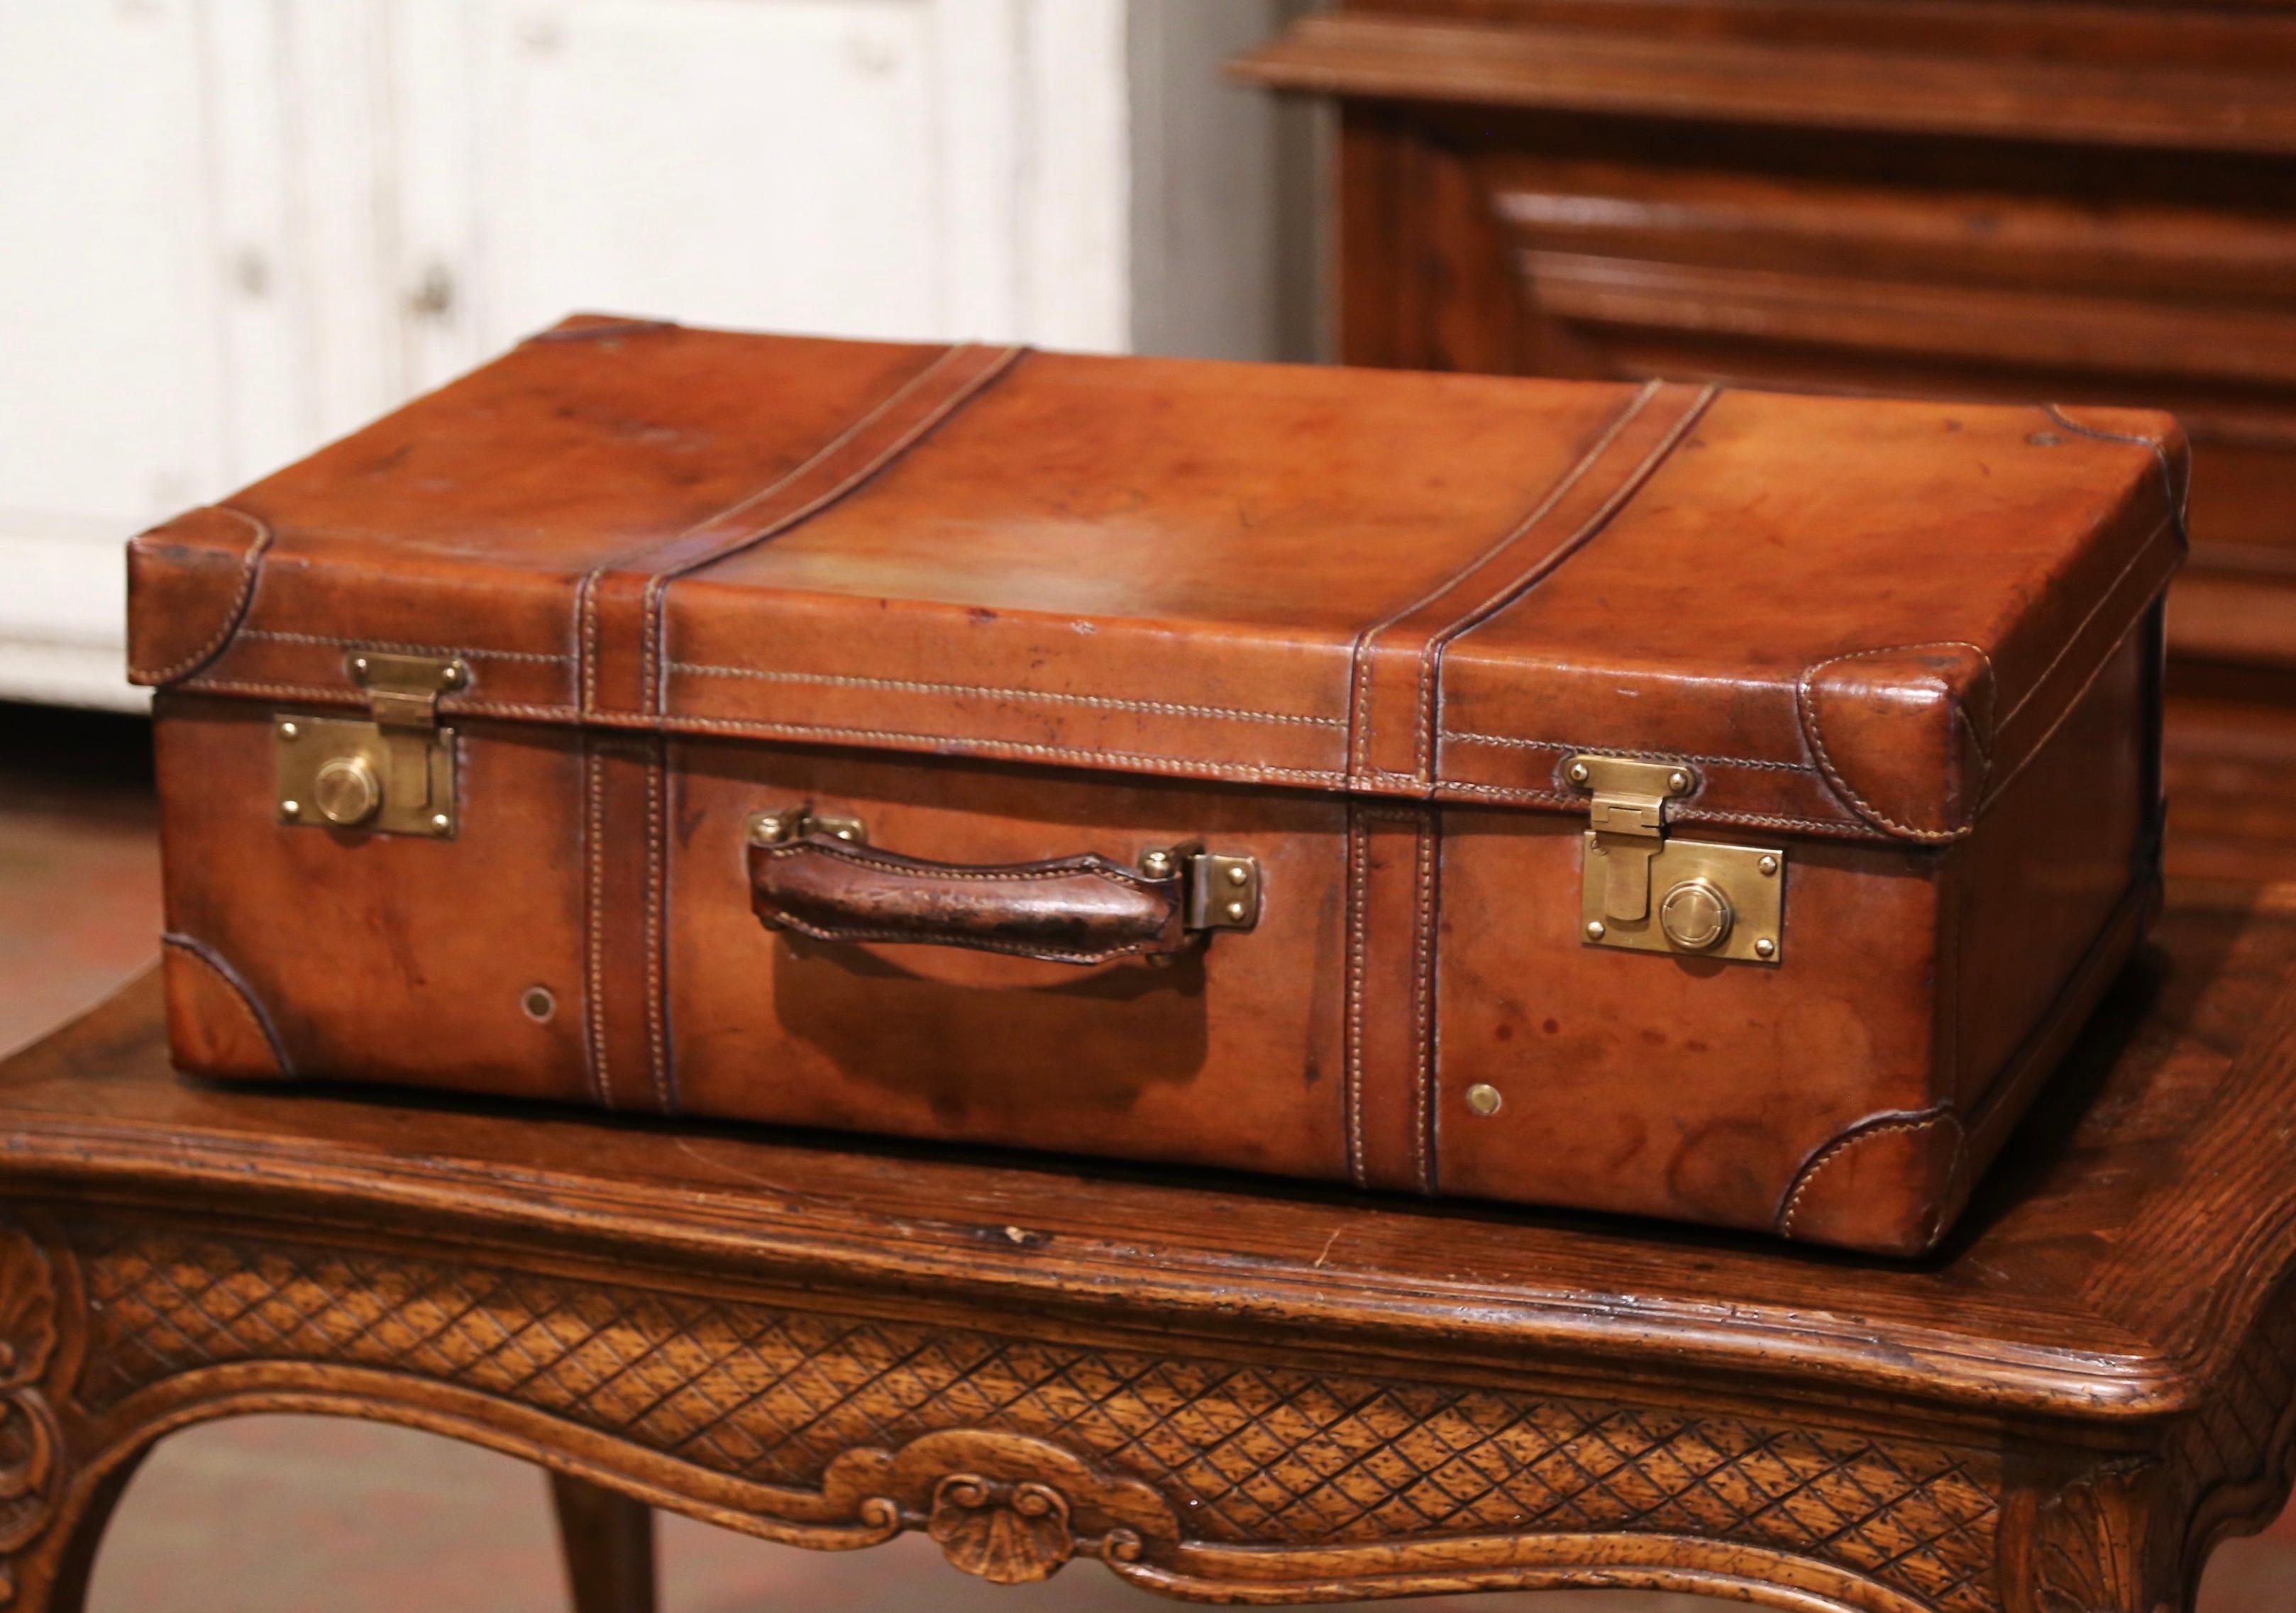 Hand-Crafted Early 20th Century French Leather Suitcase with Inside Upholstery and Tray